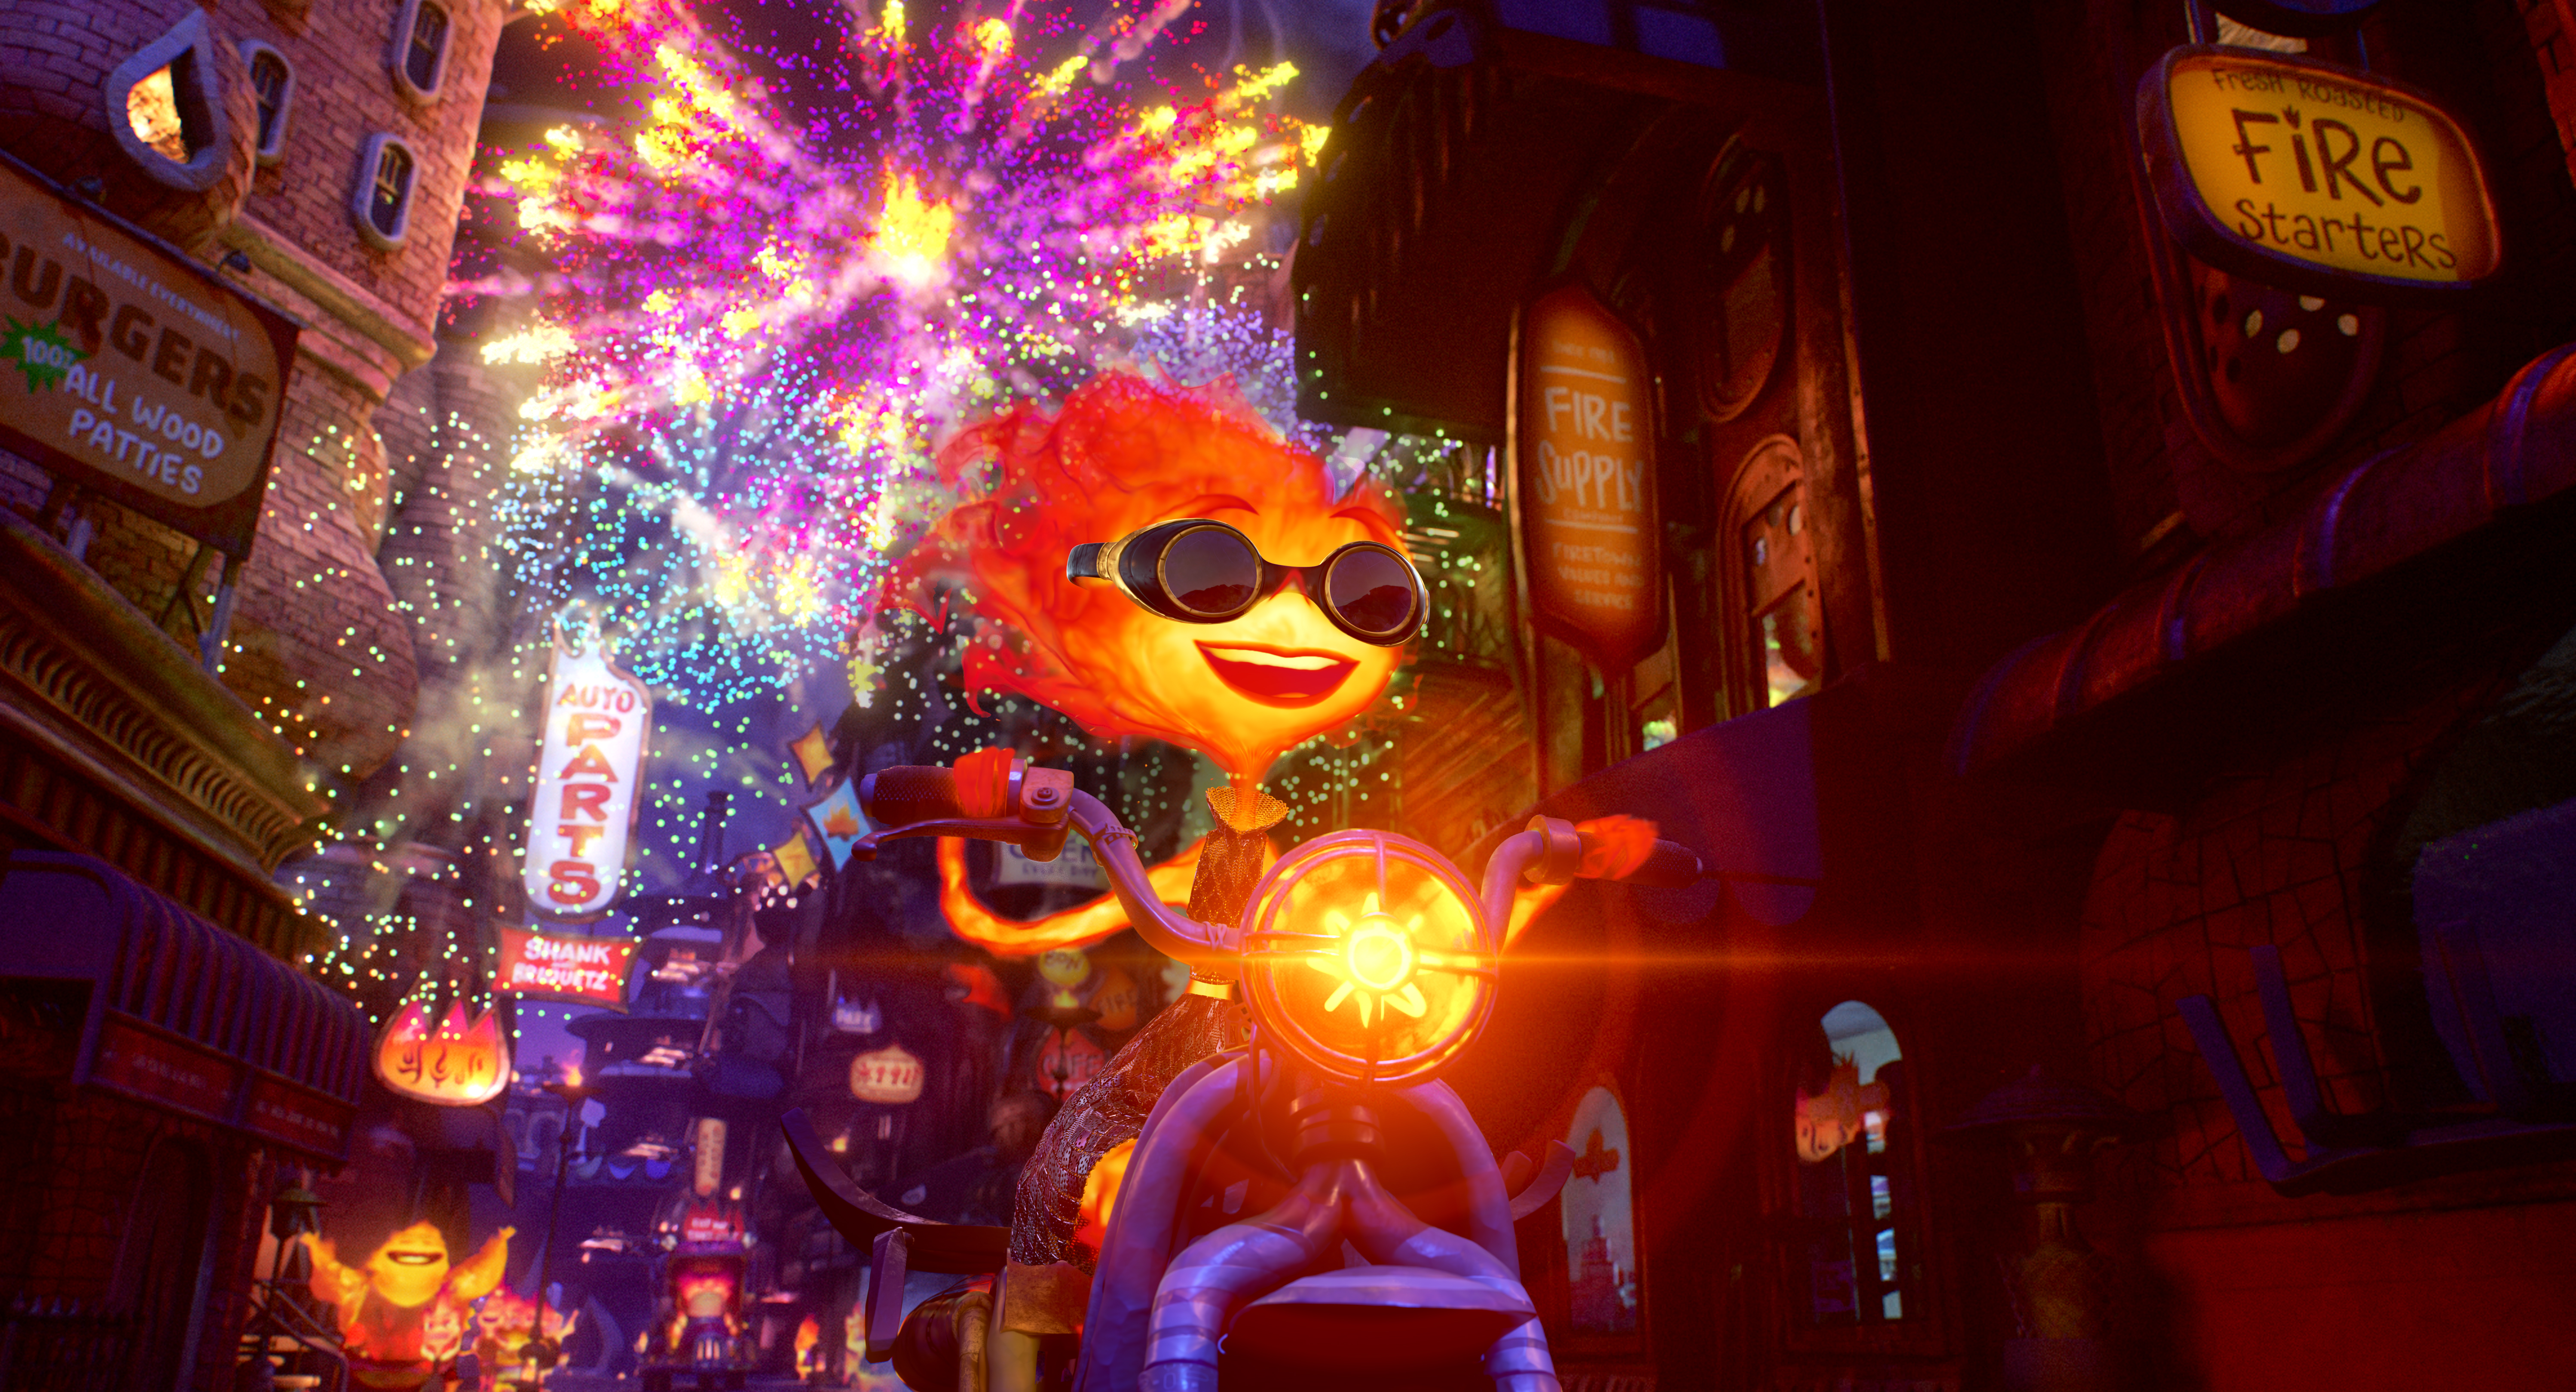 Ember, a woman made out of fire, drives through the streets of her hometown of Element City, grinning and wearing sunglasses as colorful fireworks go off in the sky behind her in Elemental